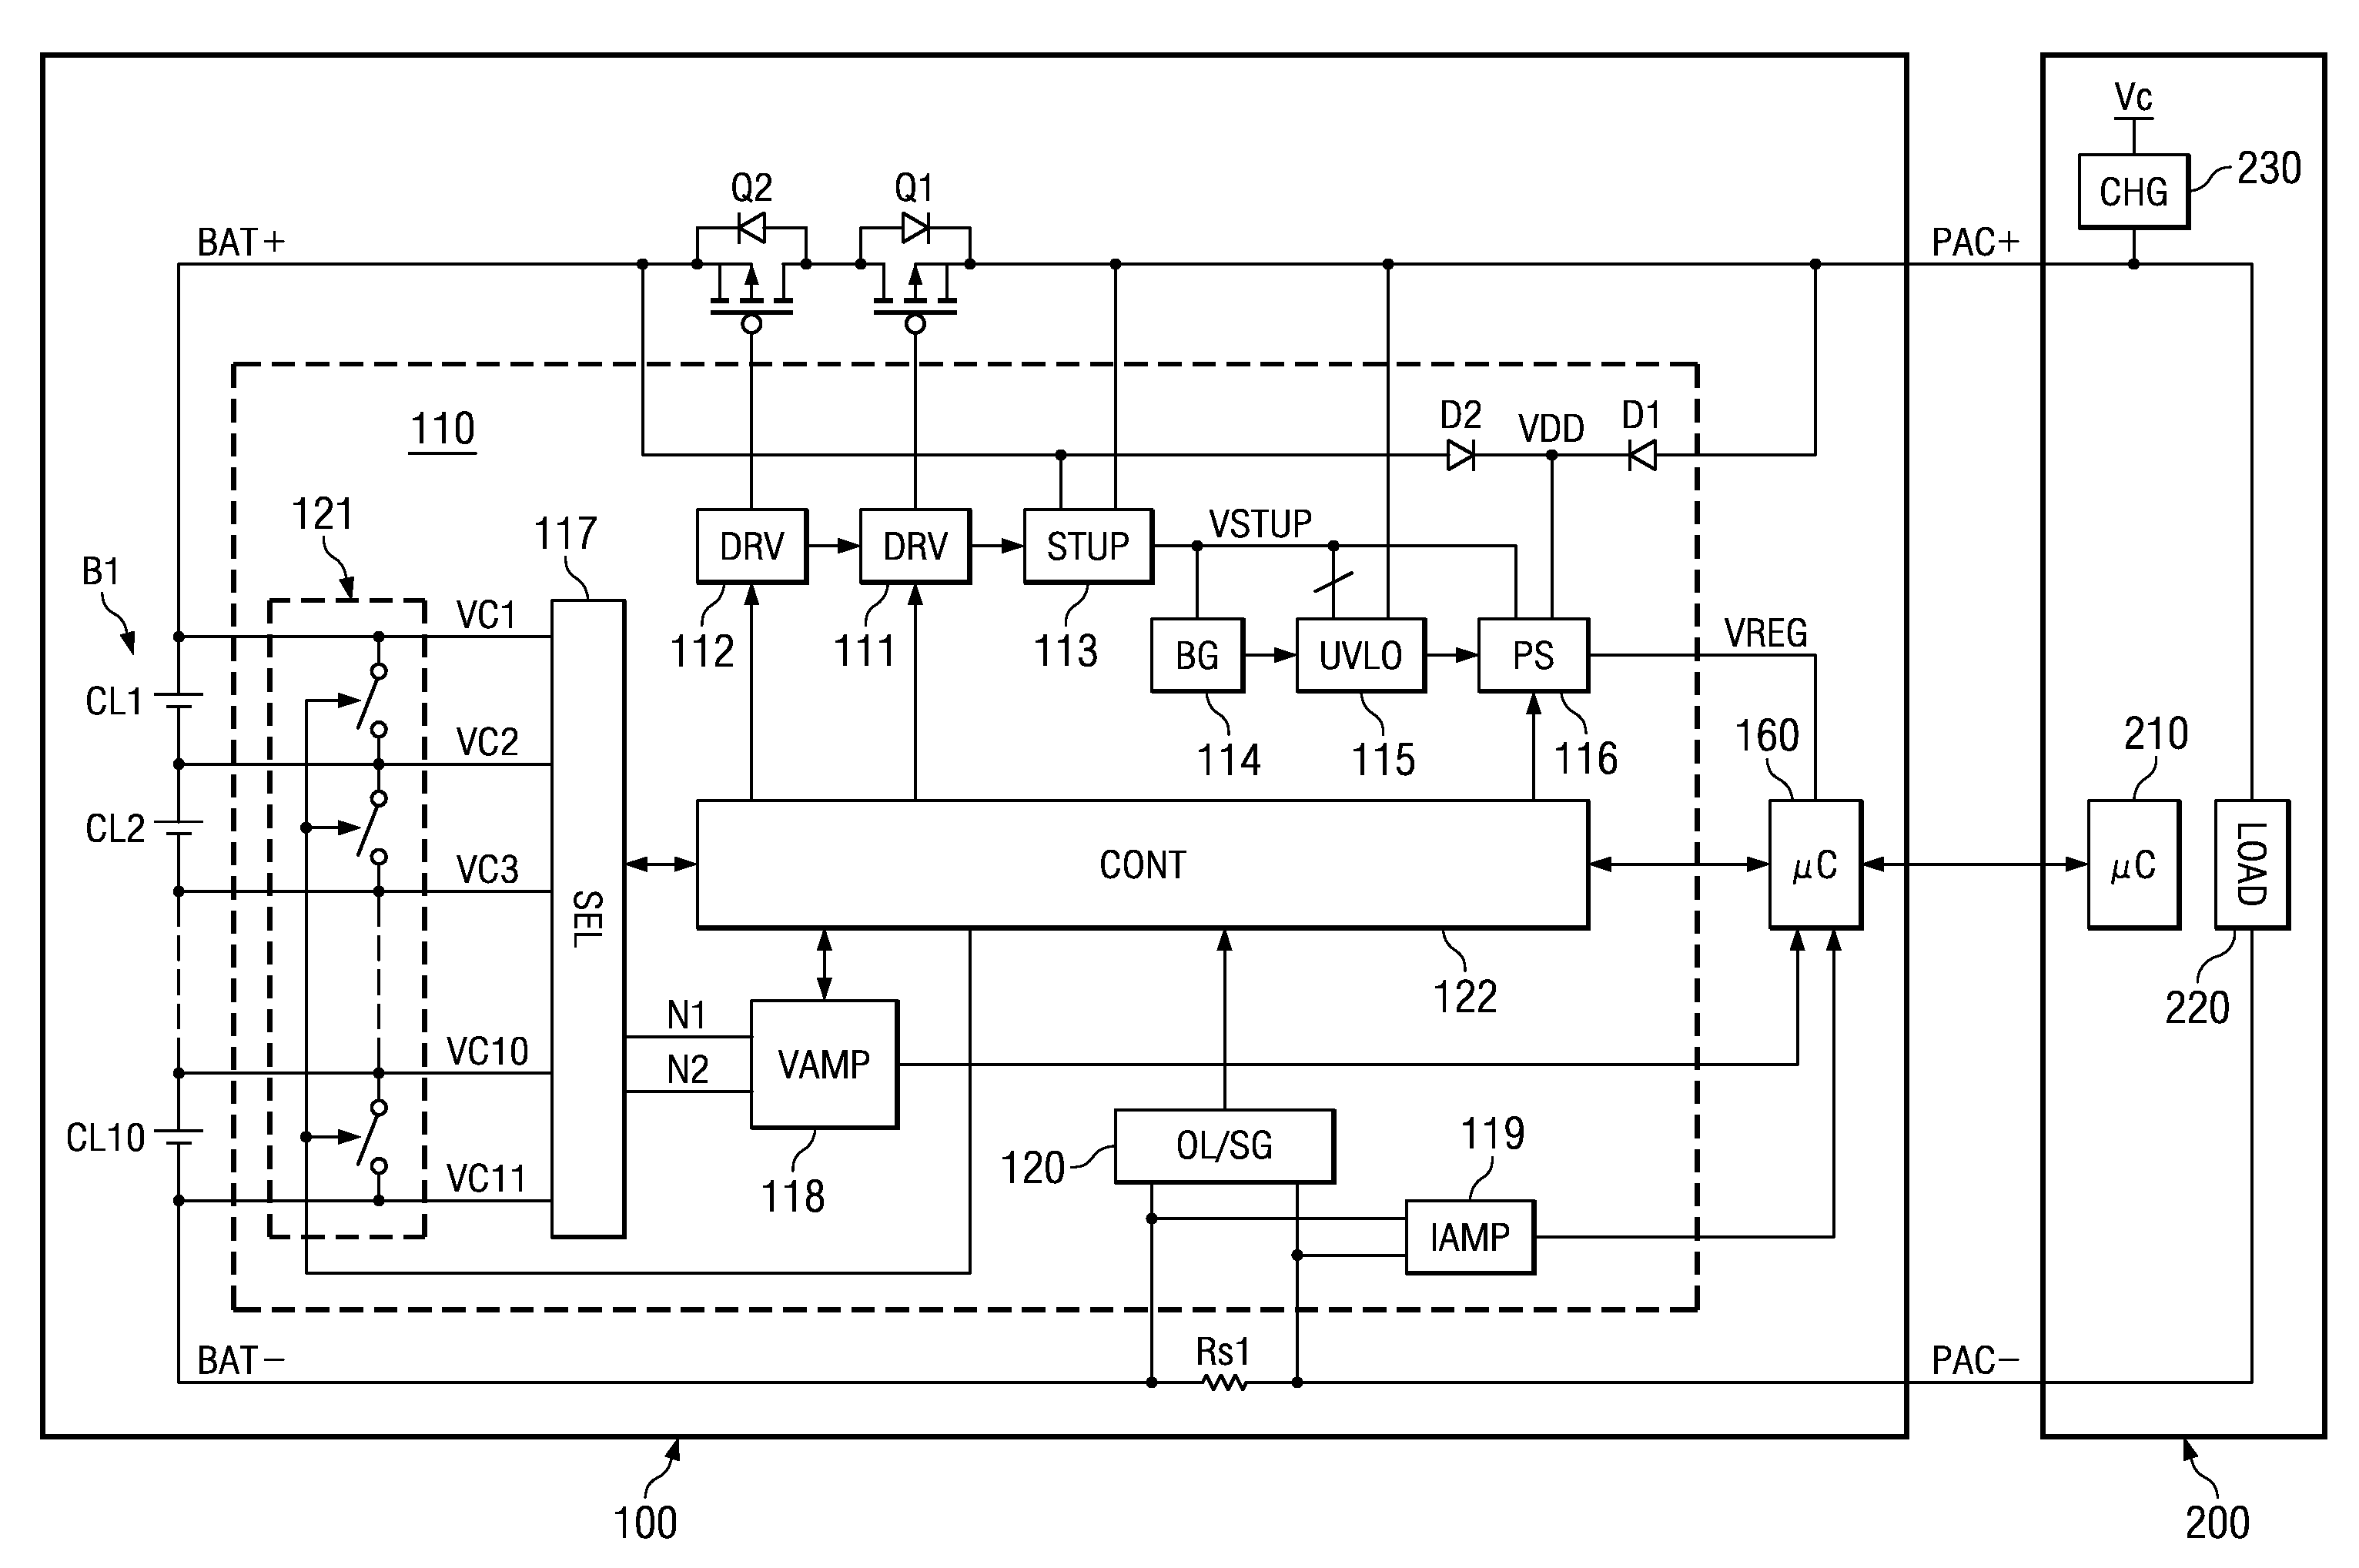 Voltage converting circuit and battery device